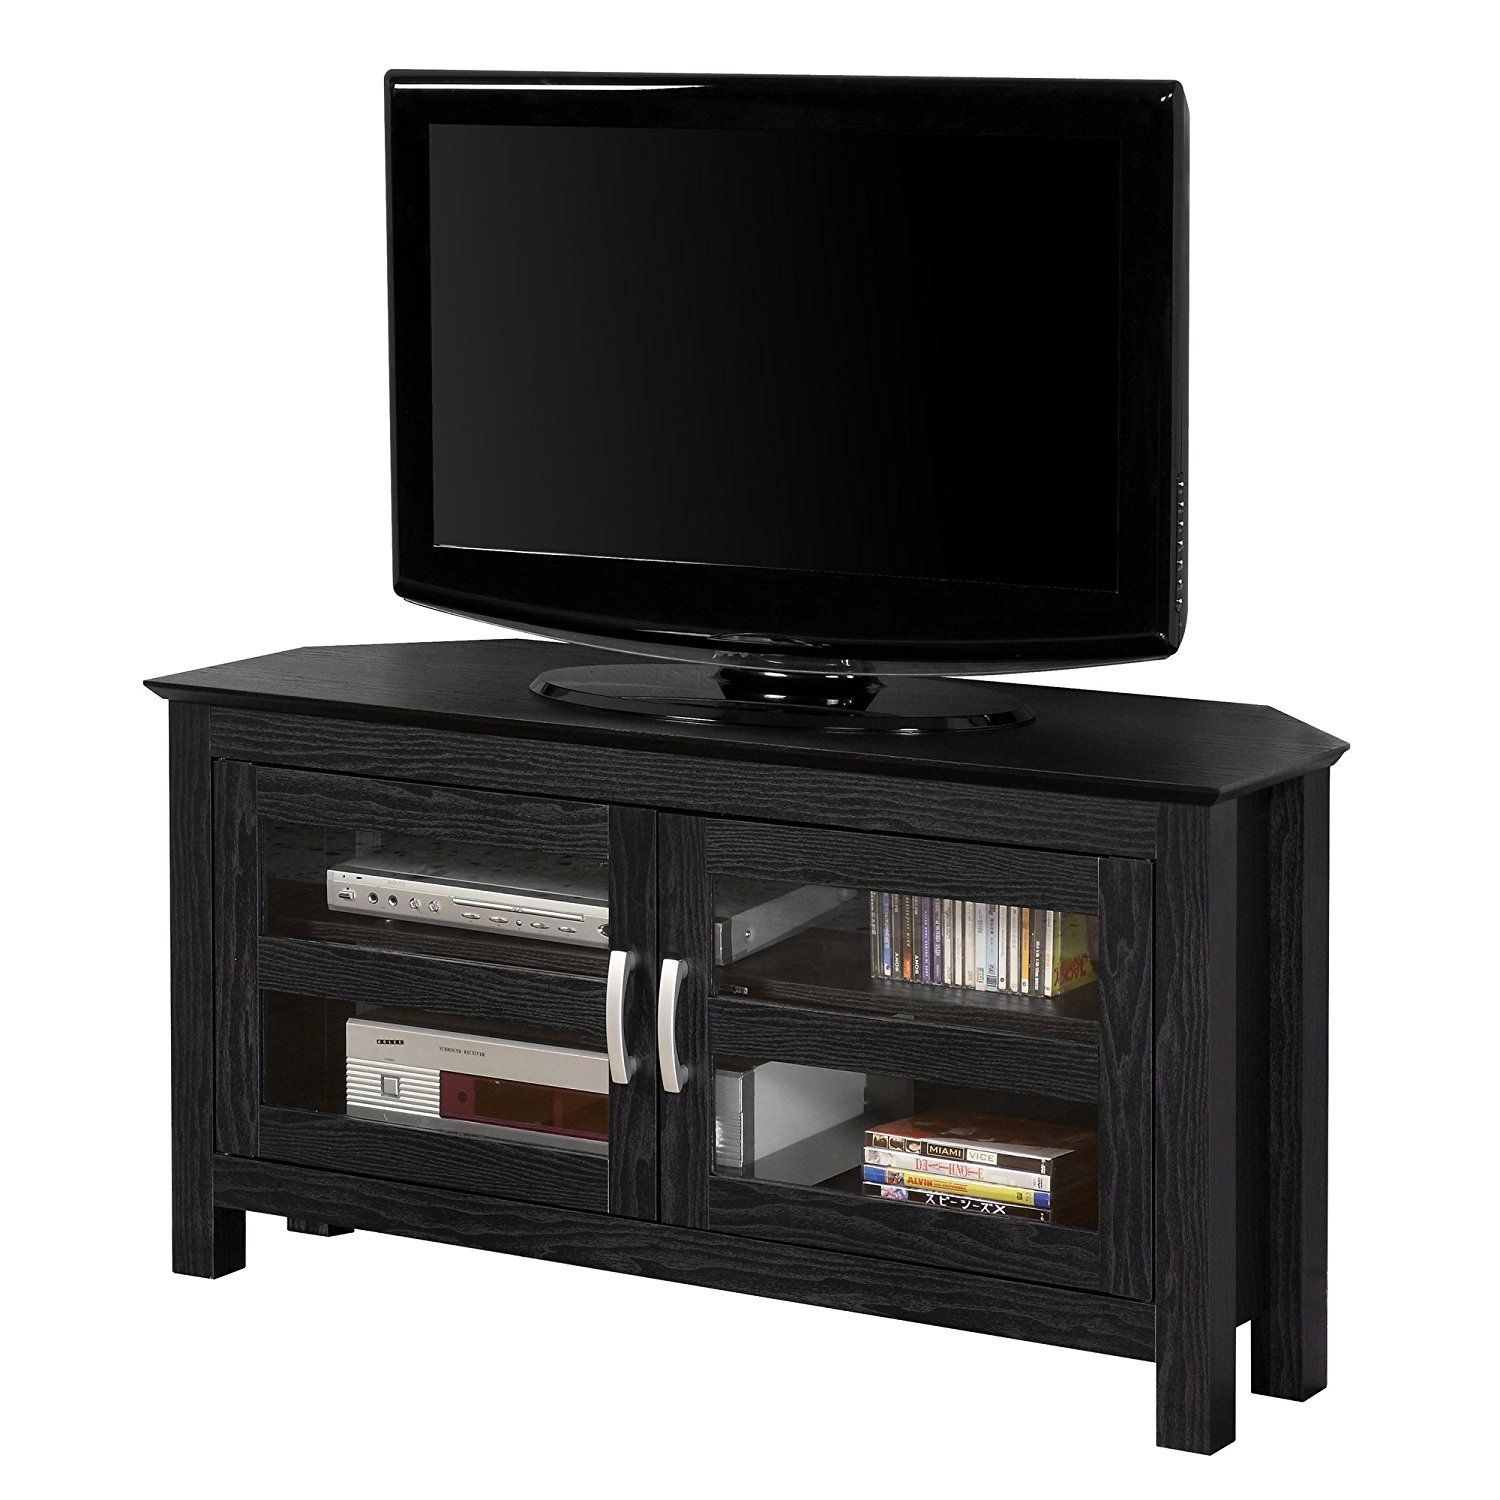 Corner Black Tv Stand Flat Screen 44 Inch Television With Regard To Corner Tv Stands For Flat Screen (View 6 of 15)